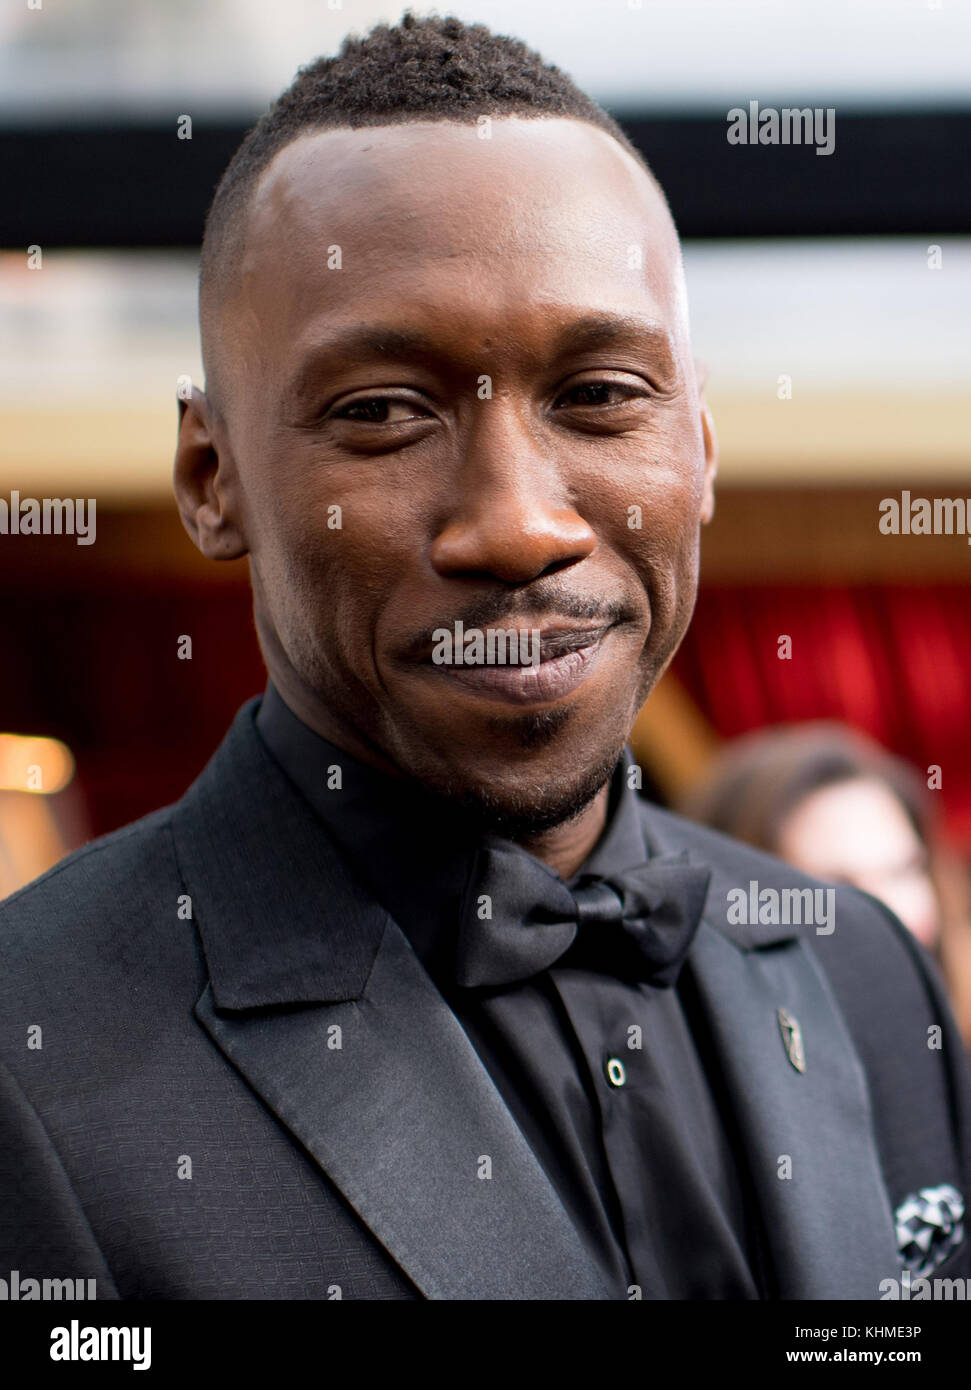 HOLLYWOOD, CA - FEBRUARY 26: Mahershala Ali attends the 89th Annual Academy Awards at Hollywood & Highland Center on February 26, 2017 in Hollywood, California  People:  Mahershala Ali  Transmission Ref:  MNC Stock Photo